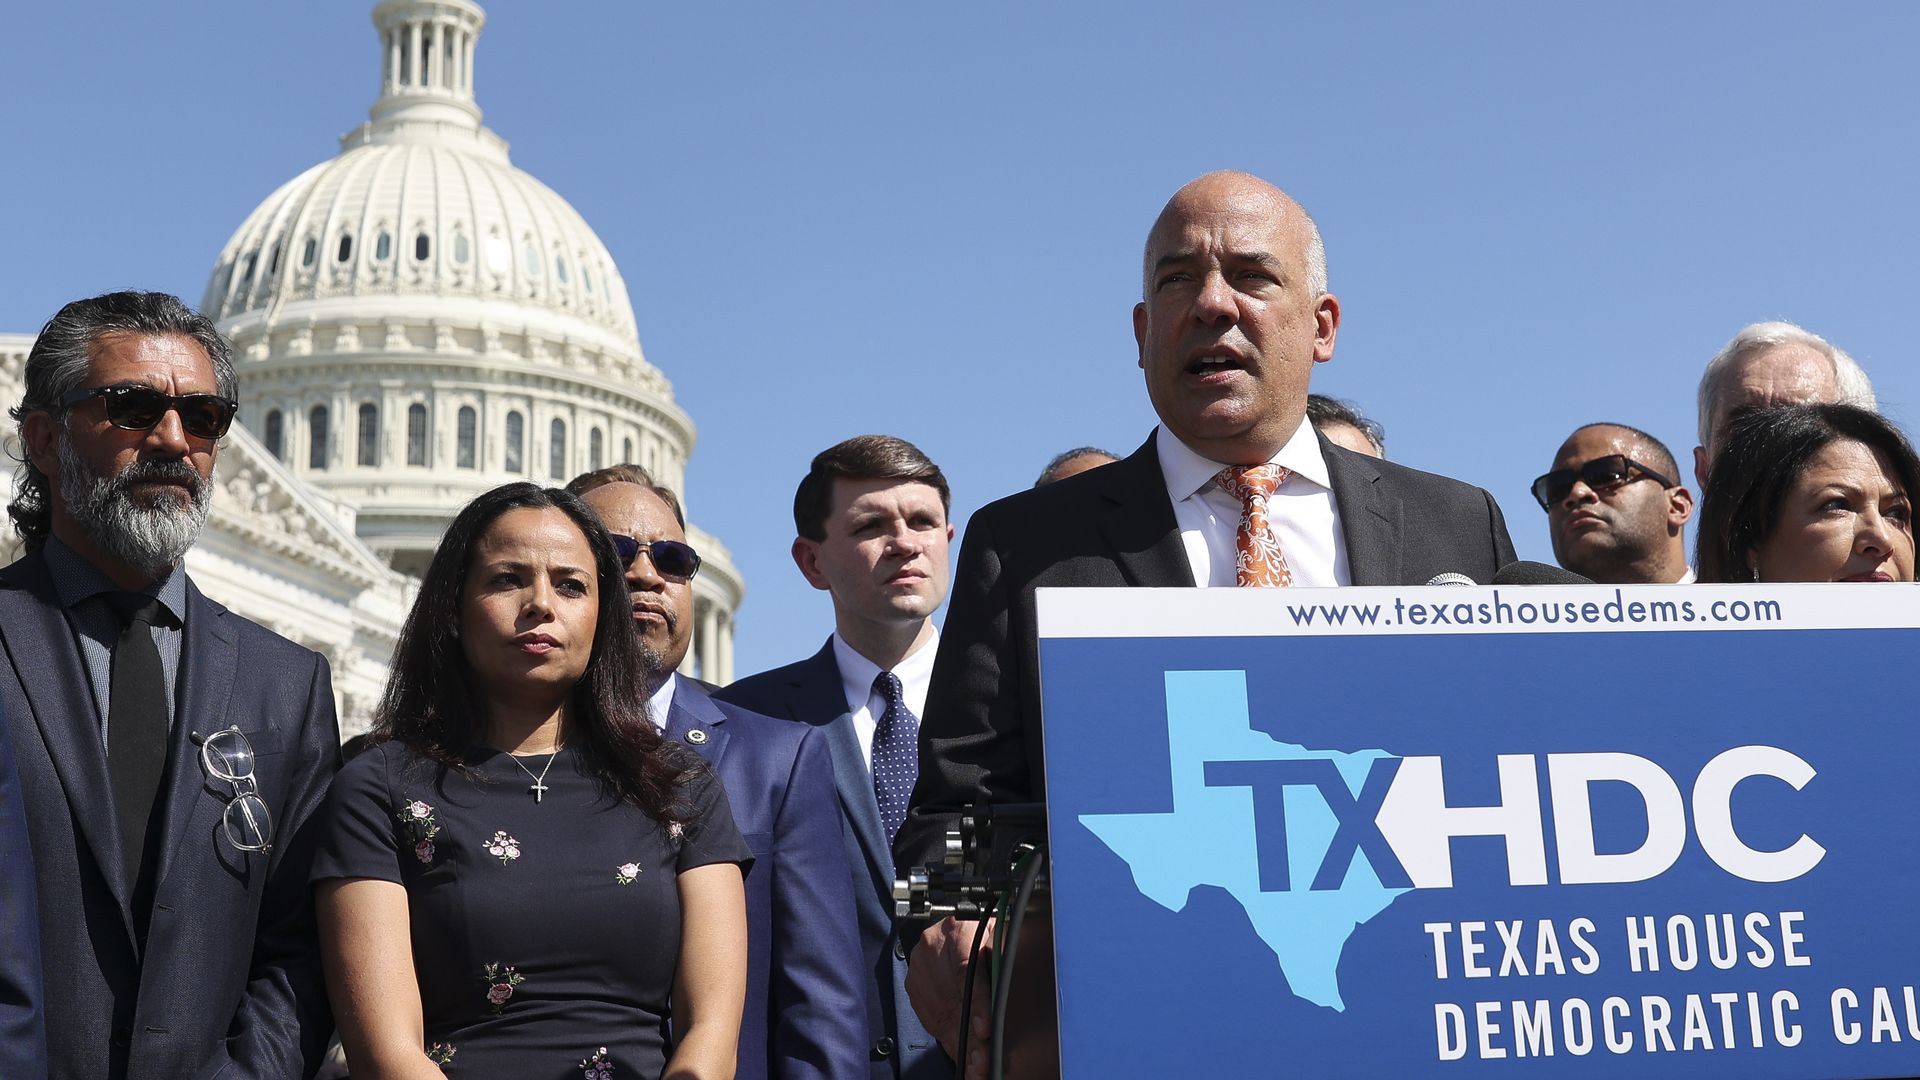 Texas House Democrats host a press conference outside the Capitol in DC